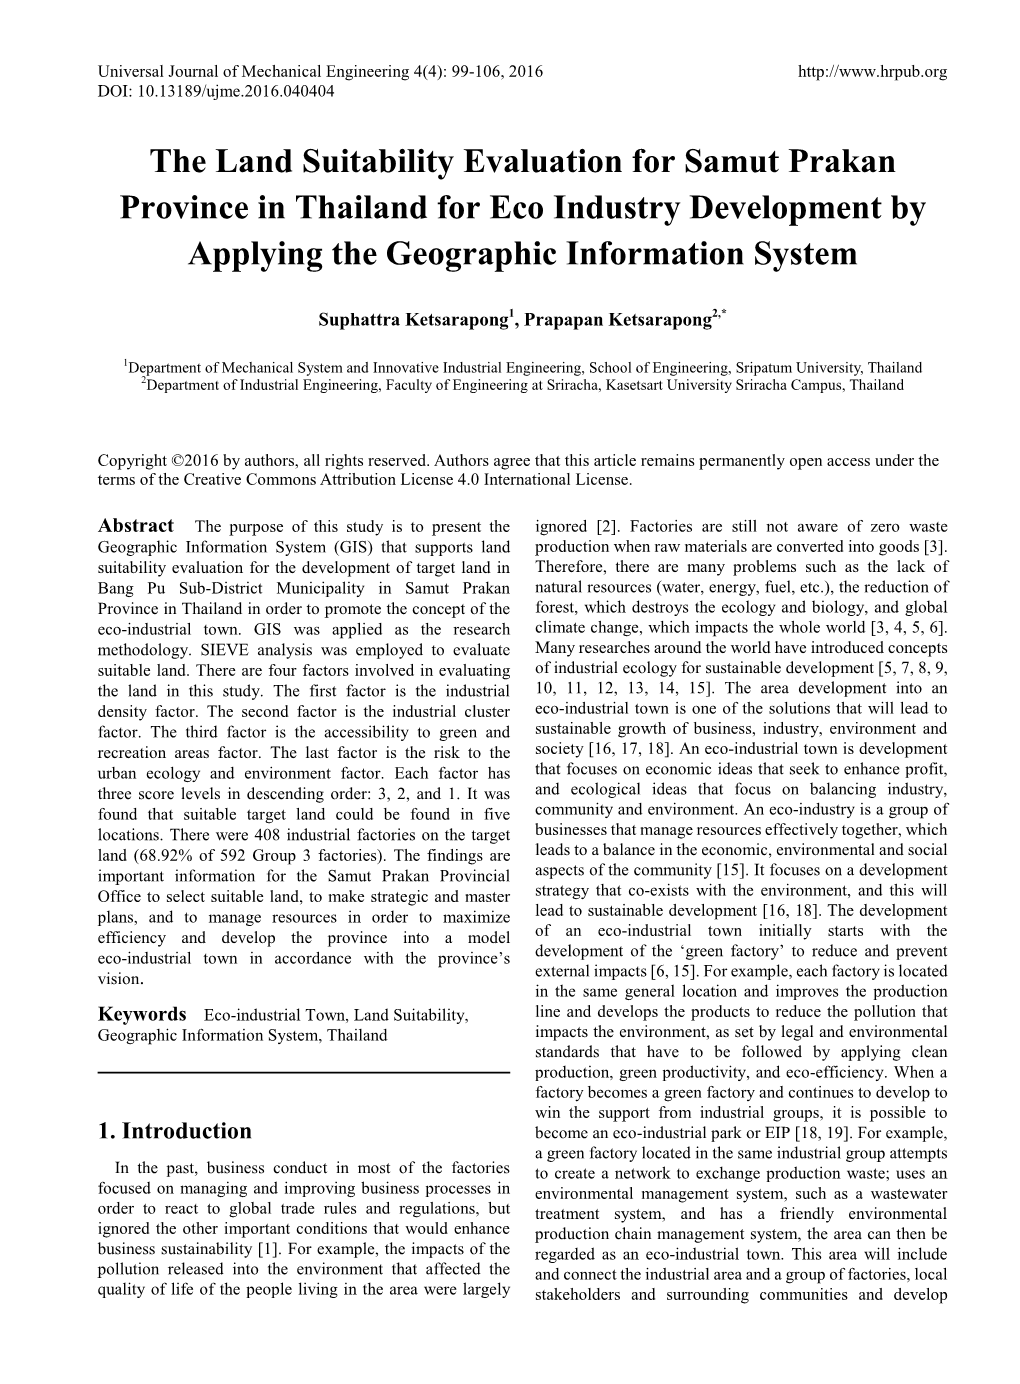 The Land Suitability Evaluation for Samut Prakan Province in Thailand for Eco Industry Development by Applying the Geographic Information System